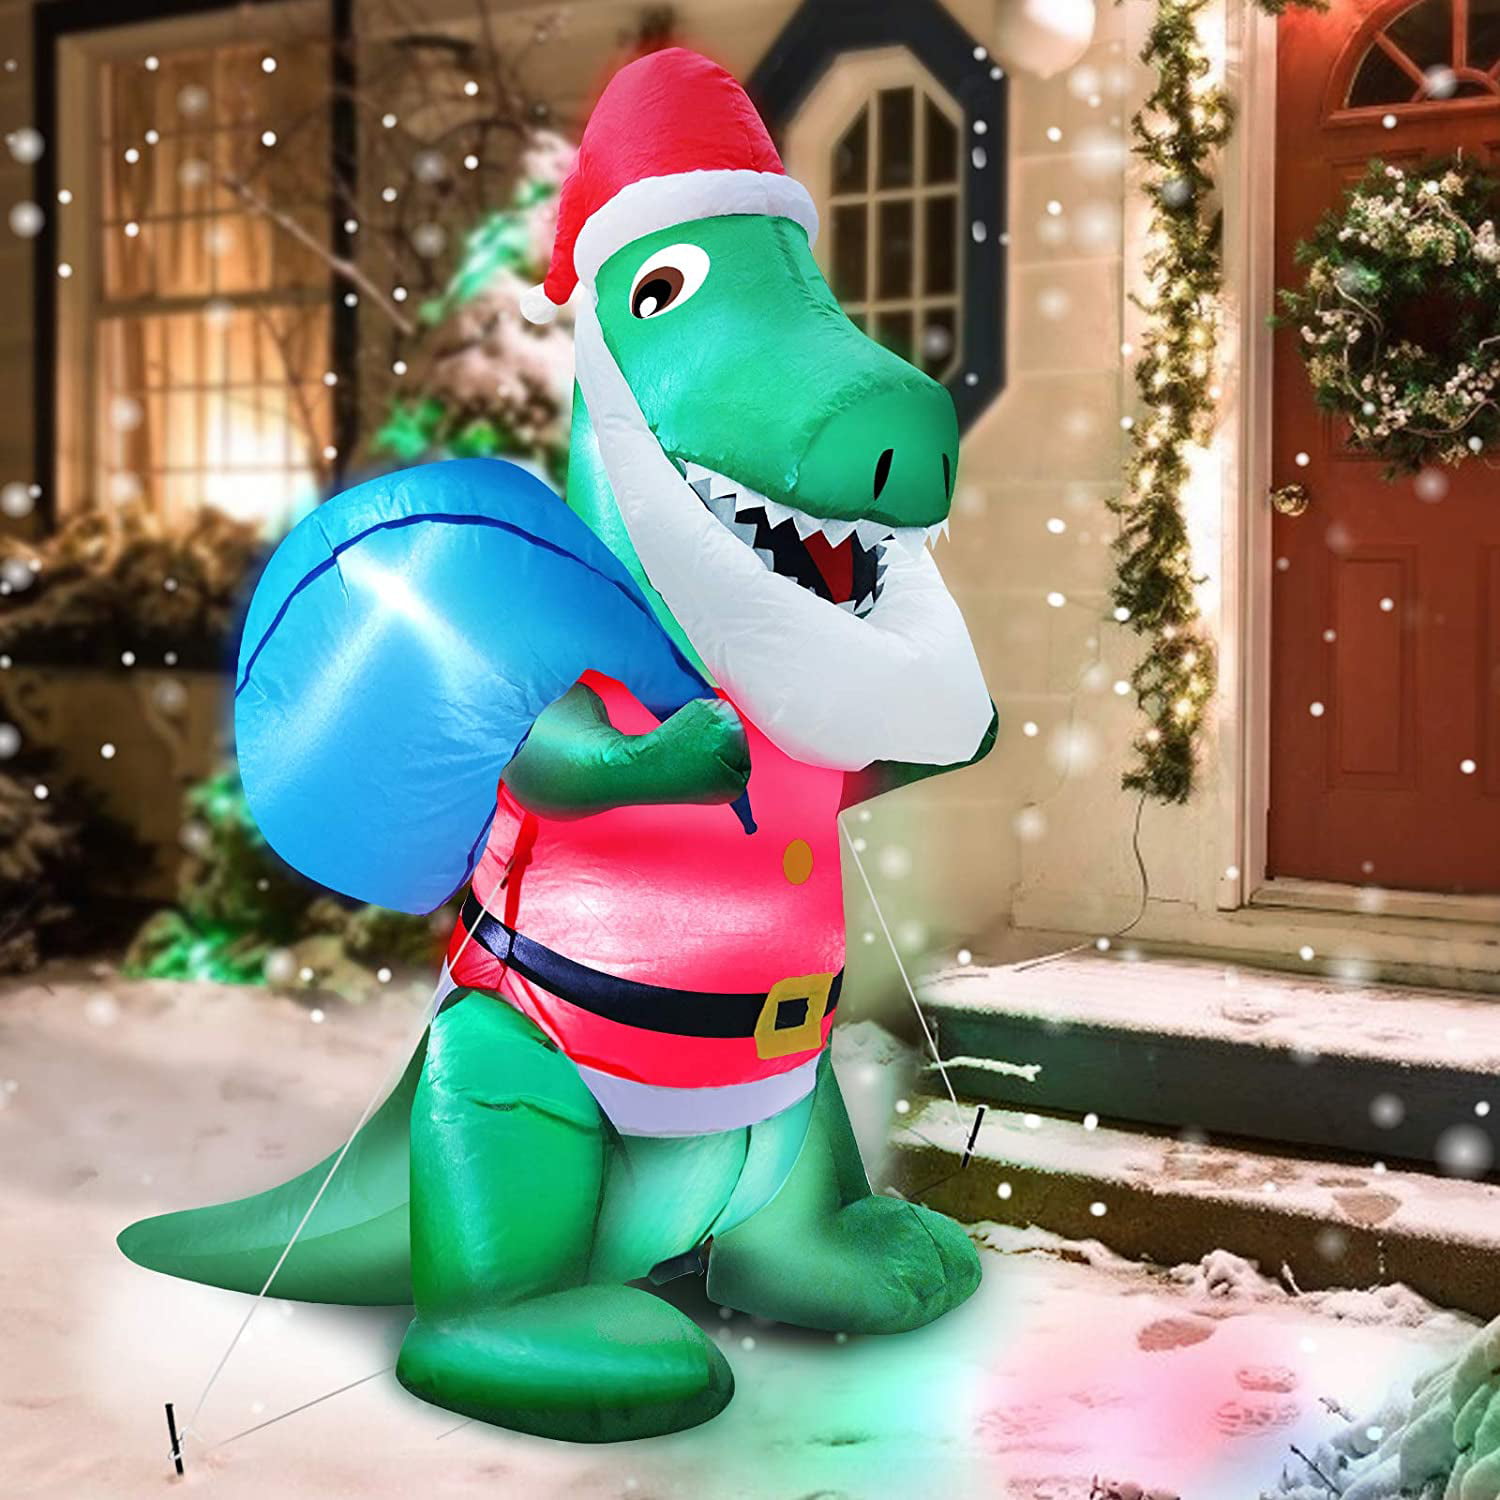 TURNMEON 3.5 Ft Long Christmas Inflatables Santa Dinosaur Christmas Decorations Outdoor Inflatables Triceratops with LED Light Stakes Christmas Inflatables Decoration Blow Up Holiday Yard Decoration 